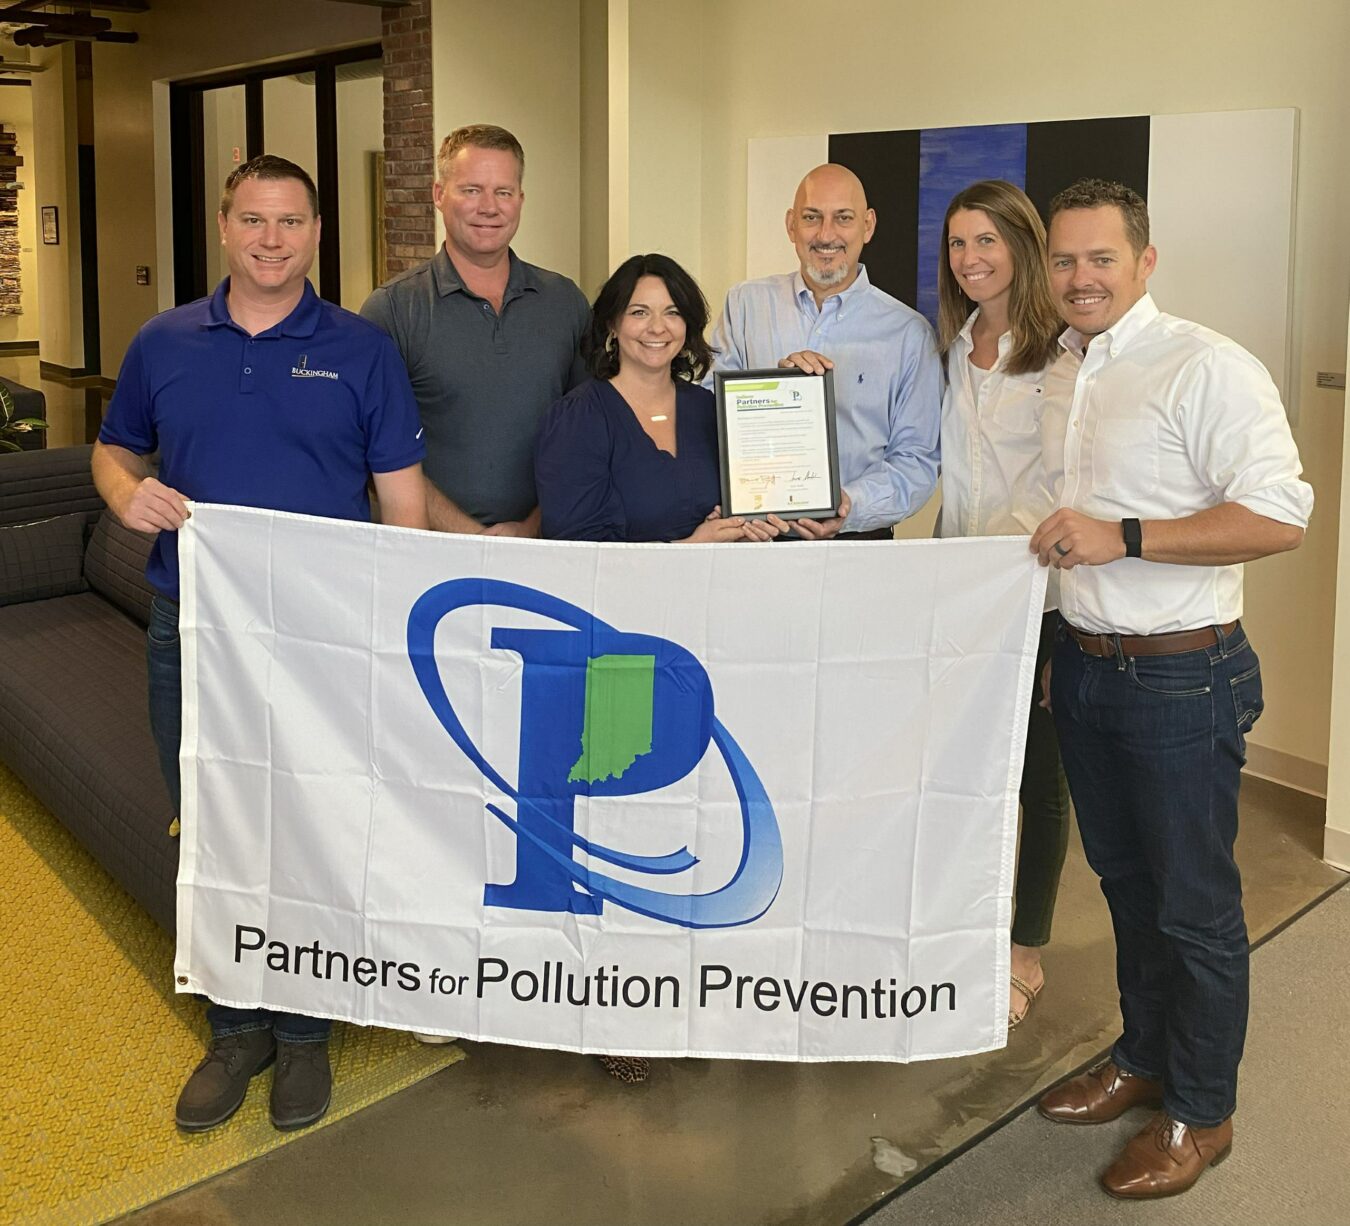 Buckingham's Director of Sustainability, and Buckingham staff, posing in front of flag that says "Partners for Pollution Prevention"